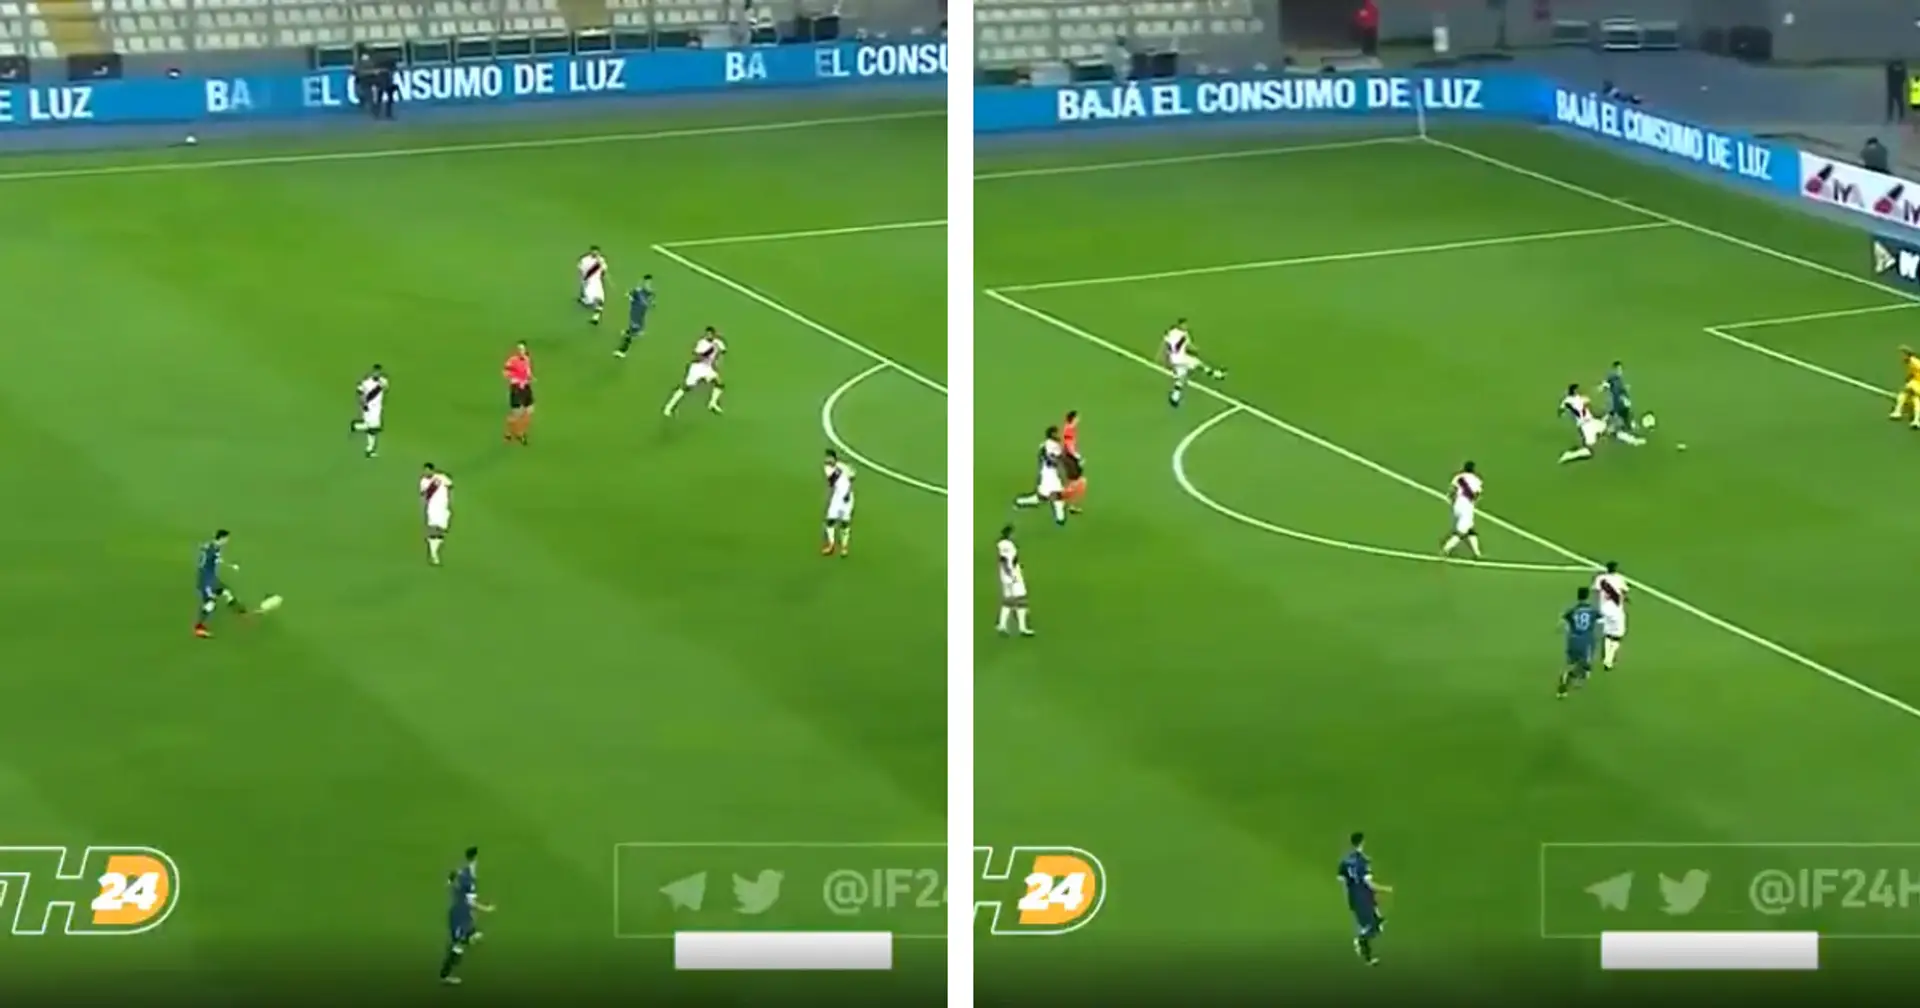 Best playmaker in the world back at it again: Leo Messi's exquisite outside-of-the-foot pass for Argentina